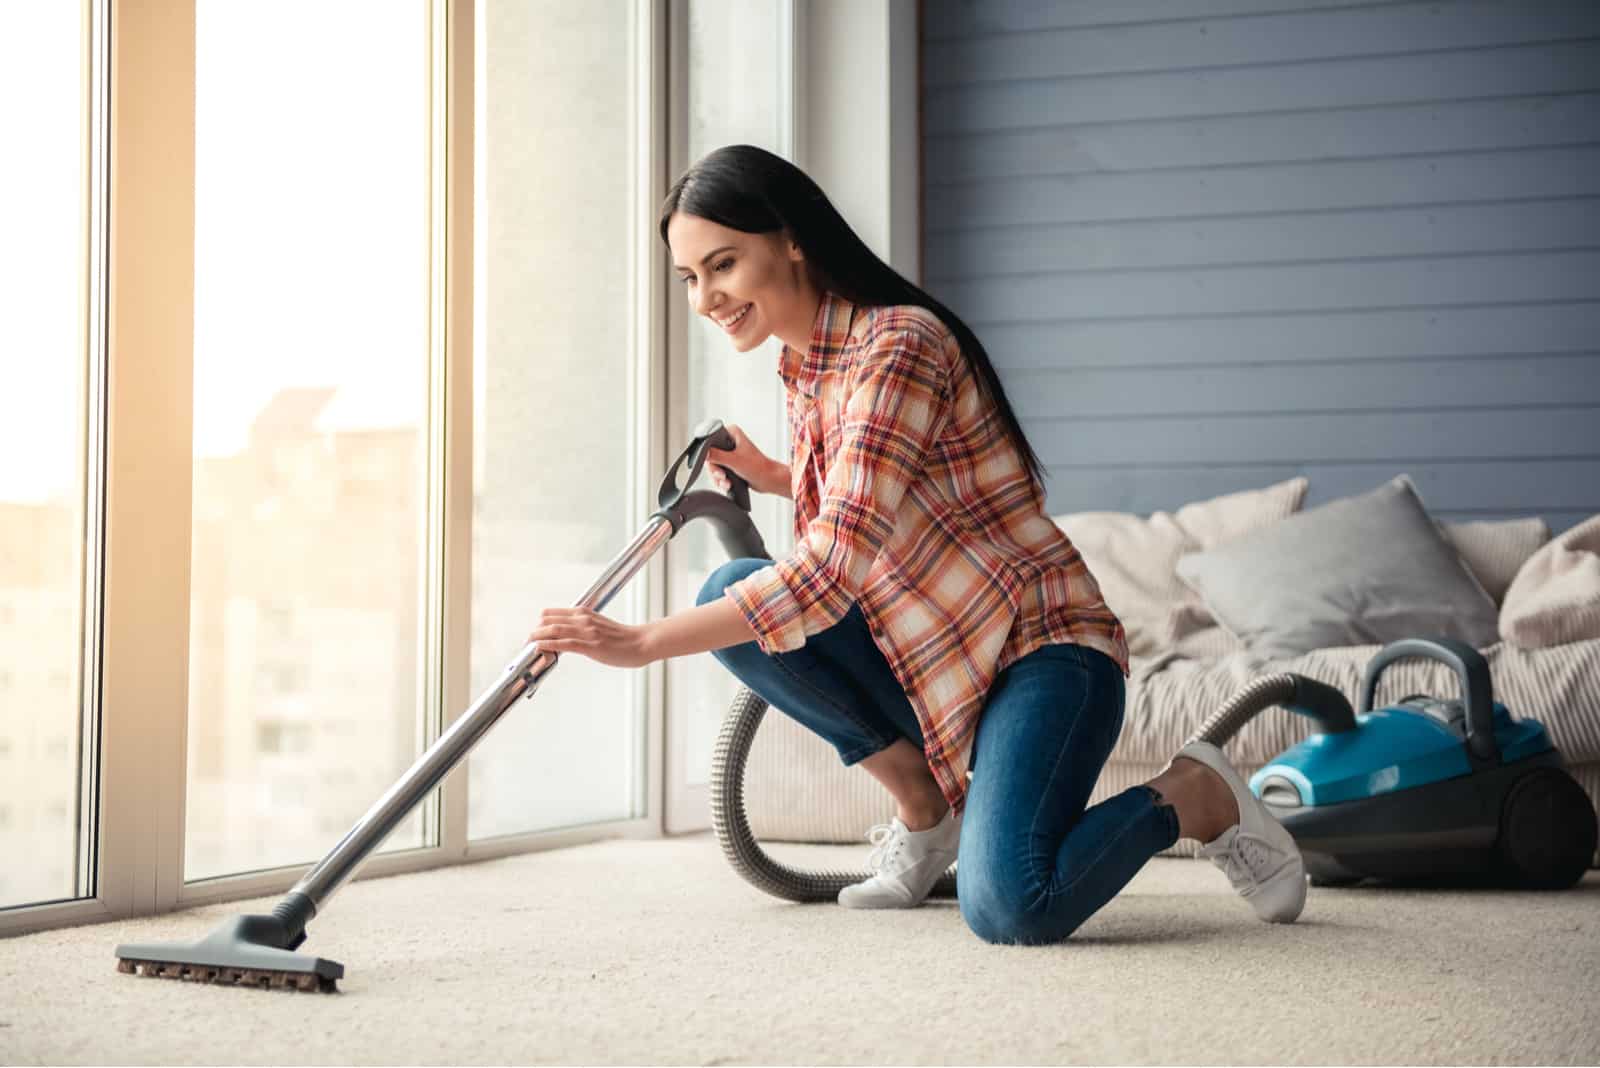 Beautiful young woman is smiling and using a vacuum cleaner while cleaning floor at home